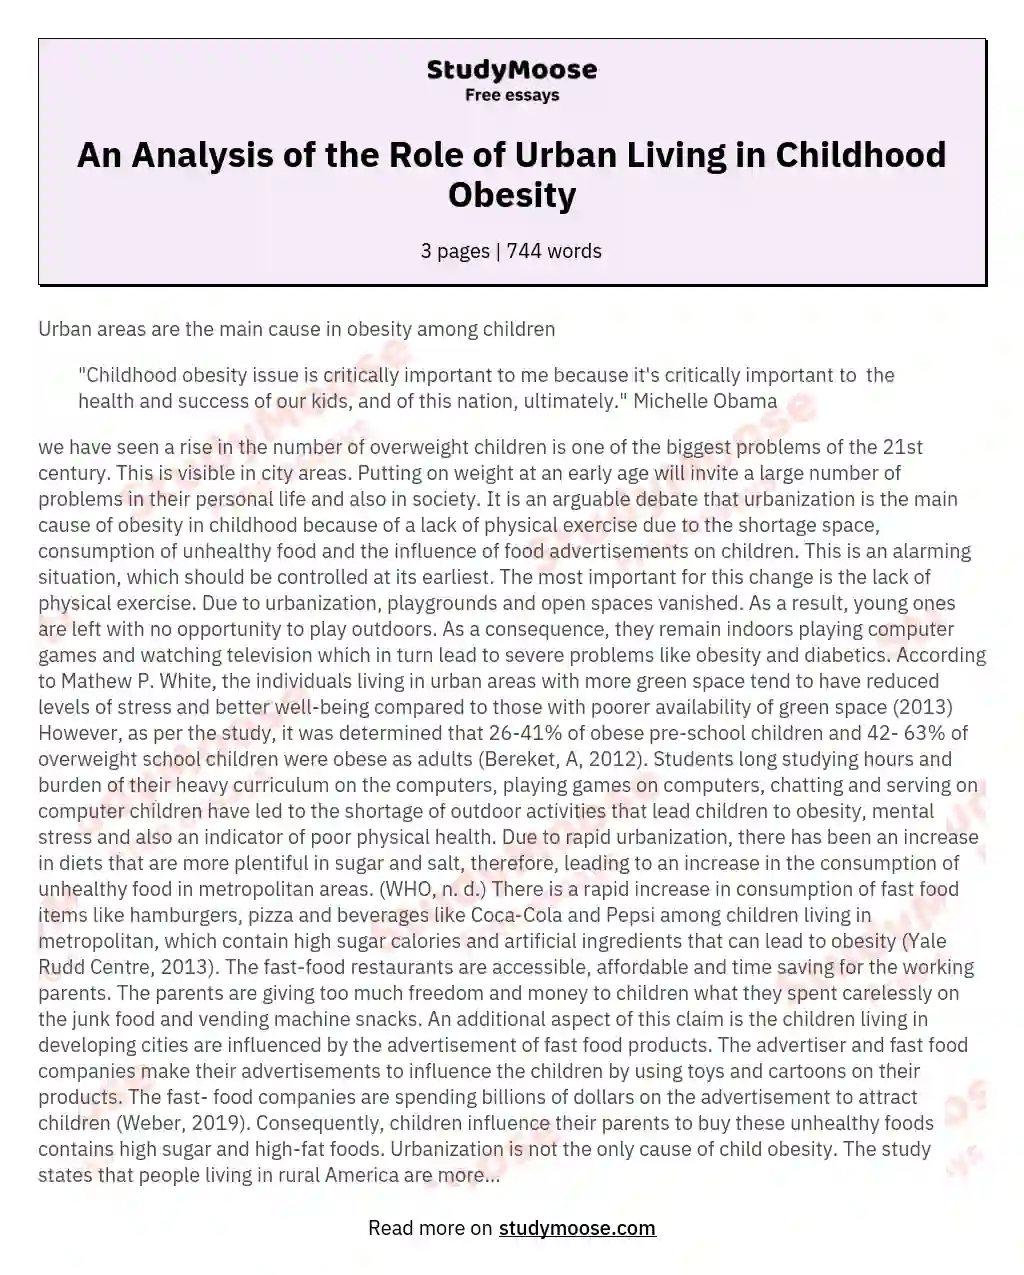 An Analysis of the Role of Urban Living in Childhood Obesity essay